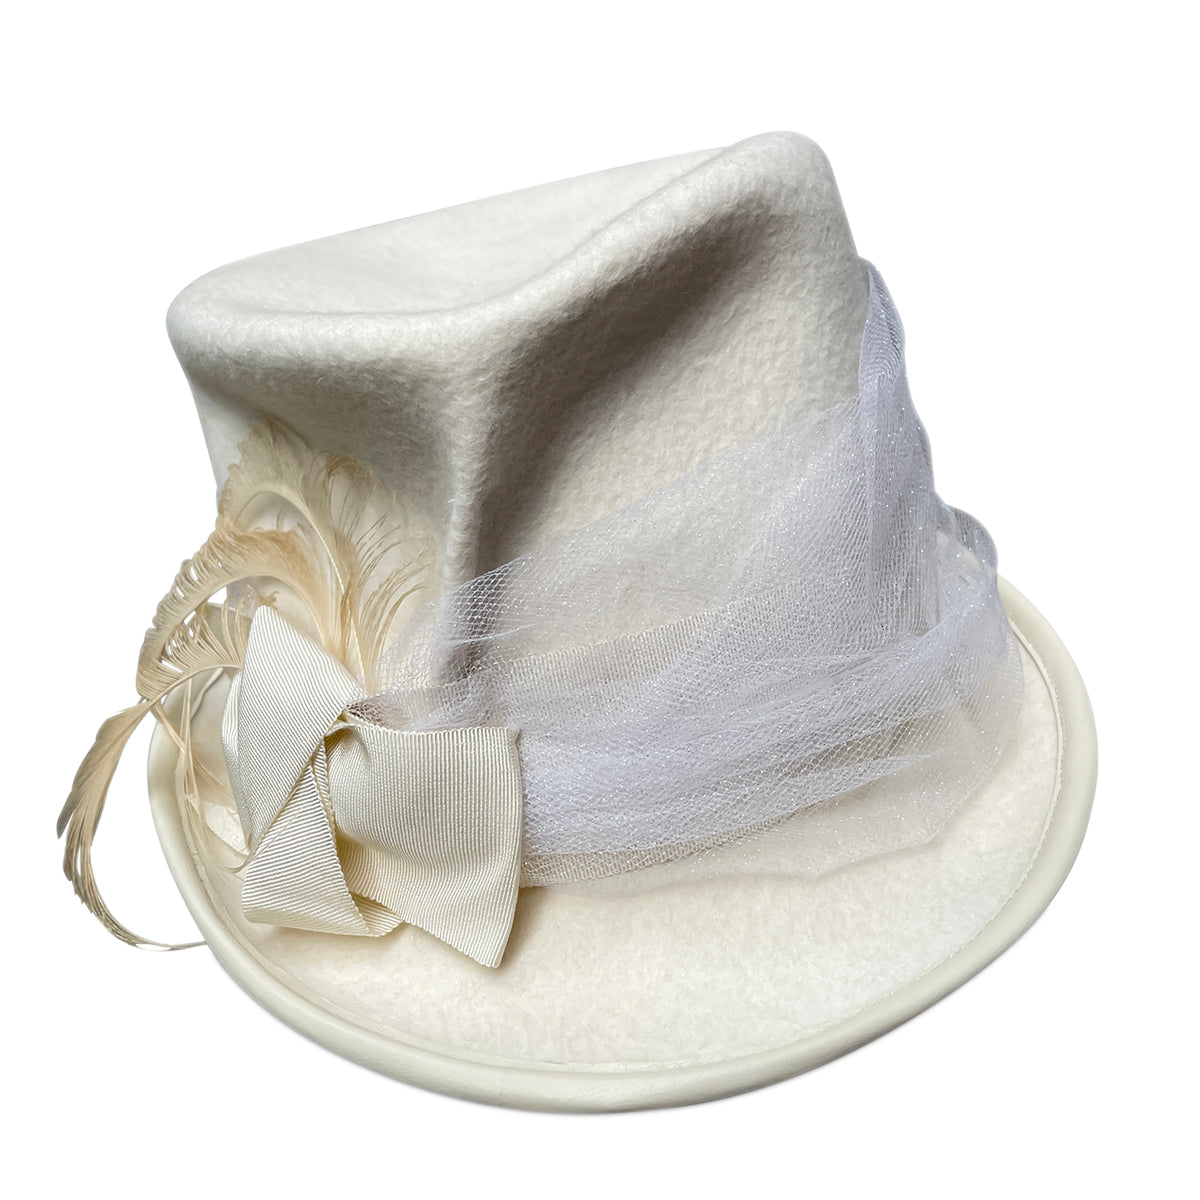 Lilith White Top Hat from Cha Cha's House of Ill Repute